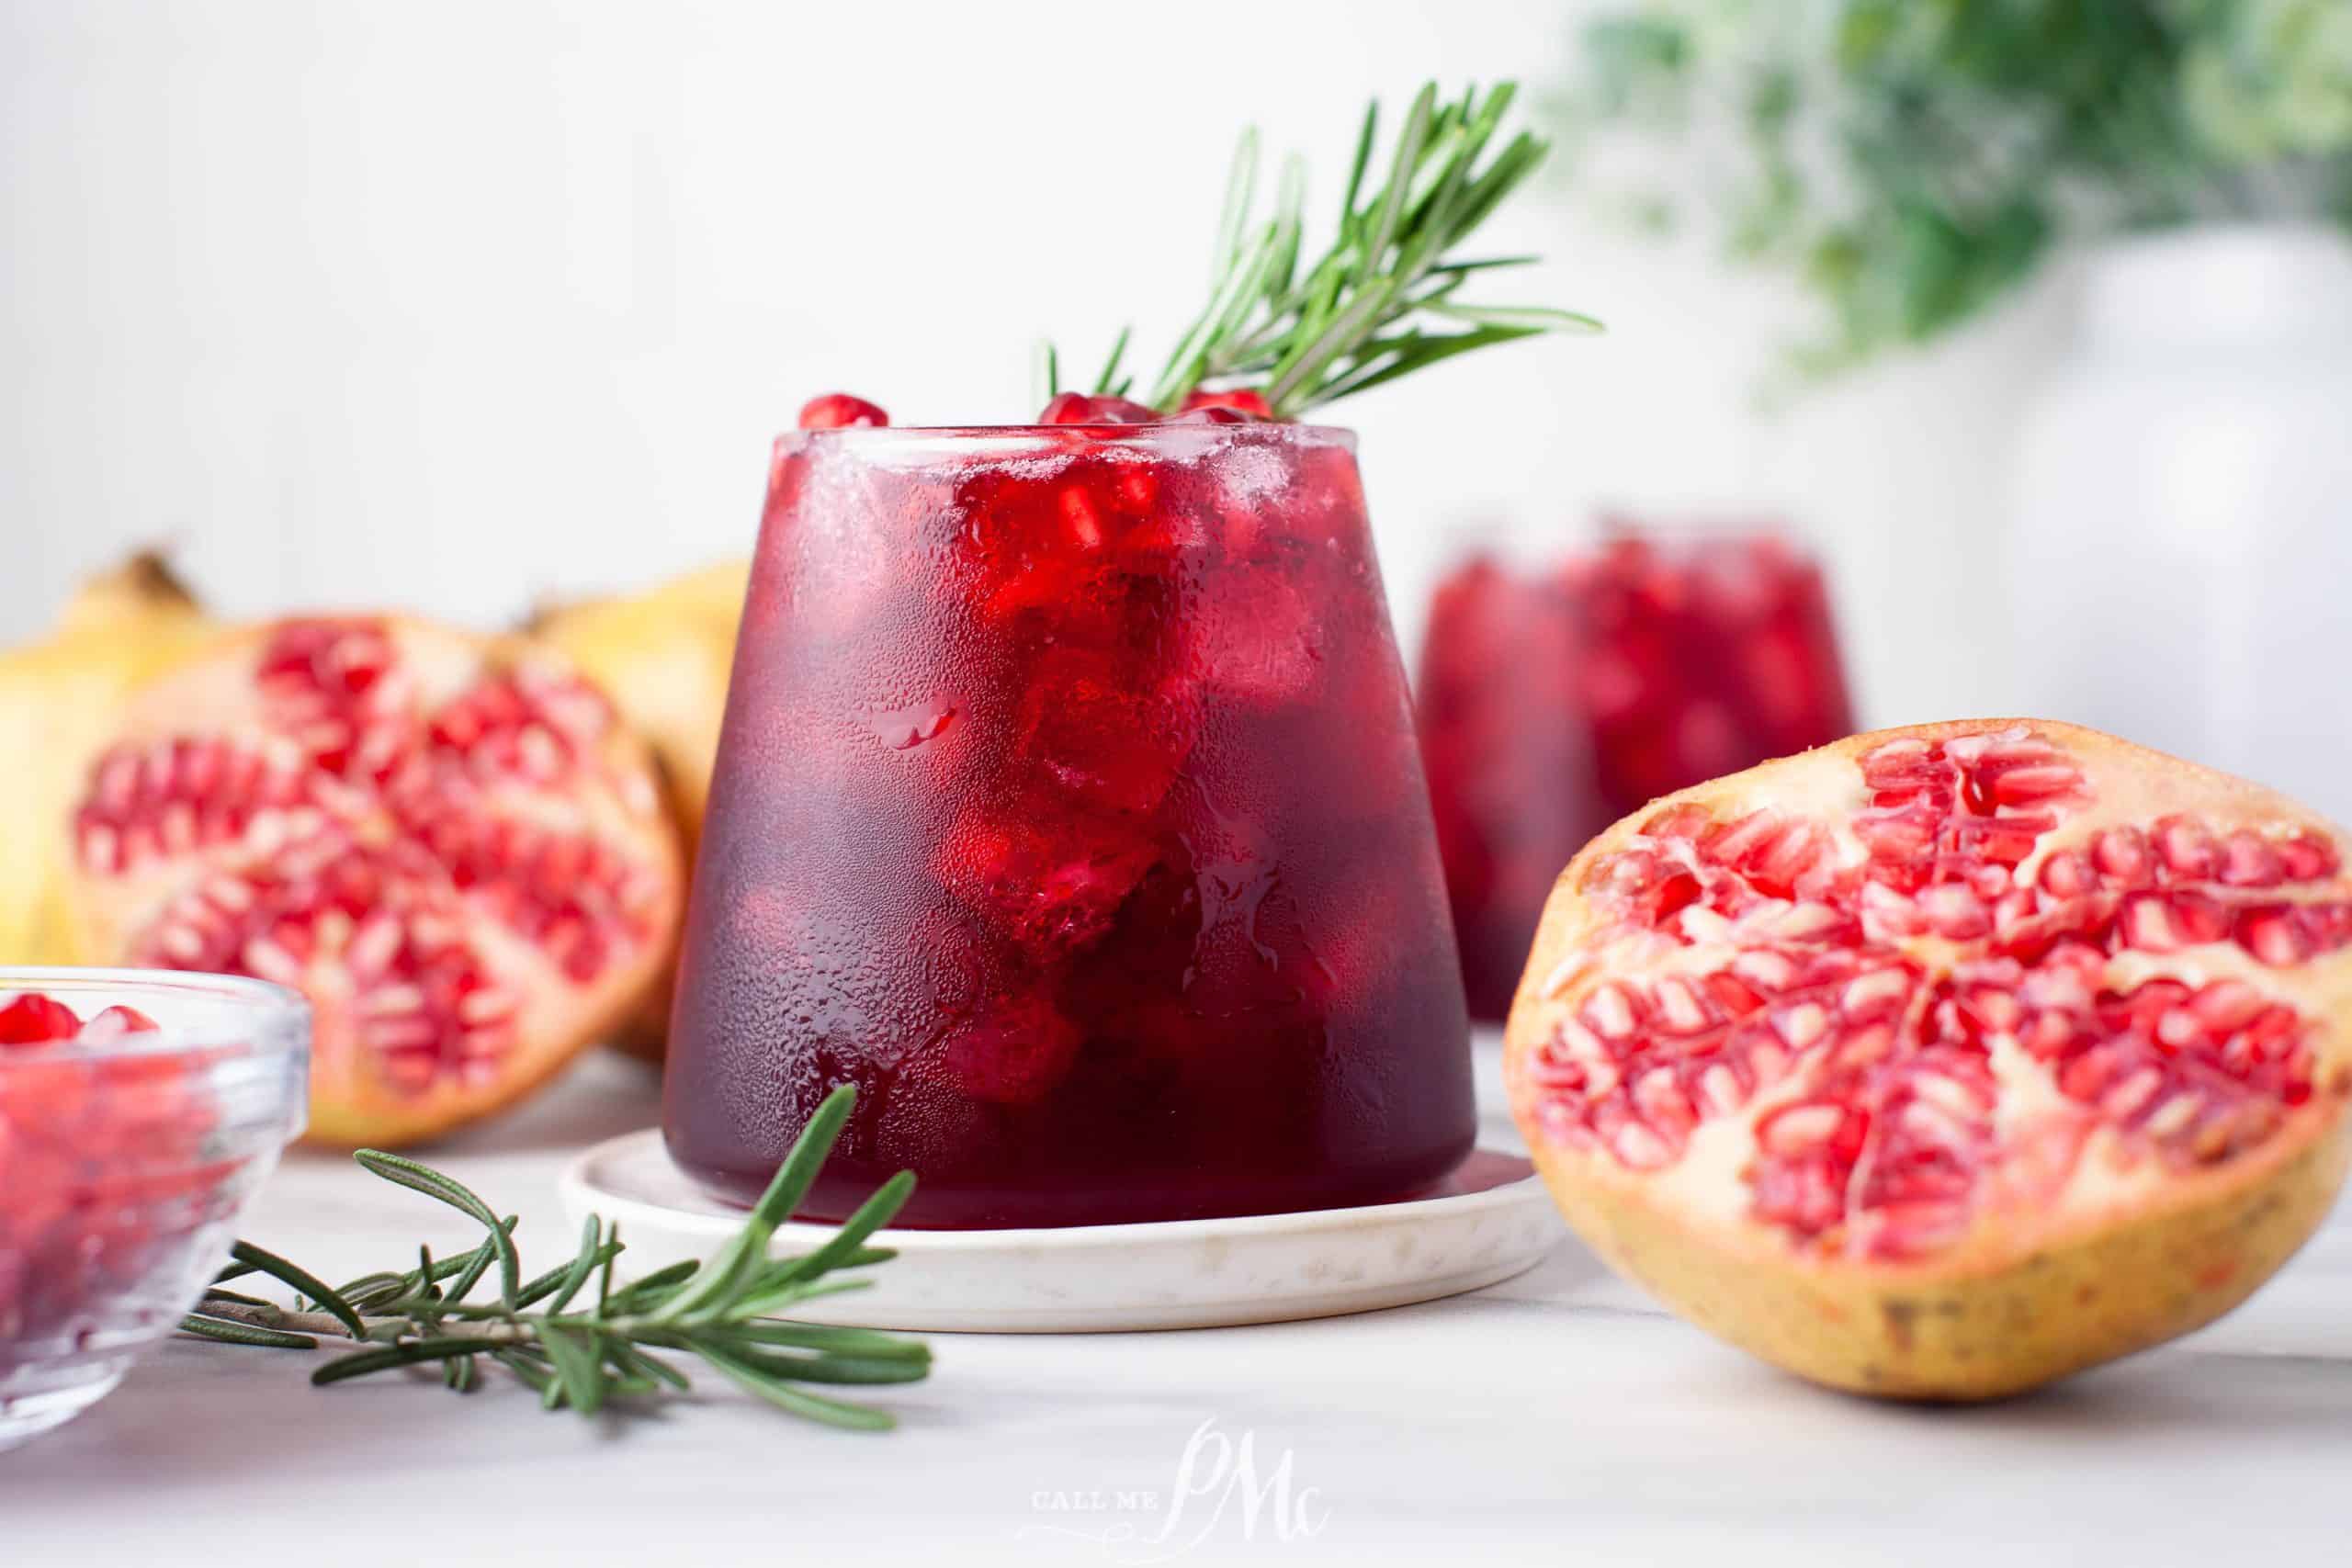 A refreshing cocktail made with pomegranate juice and garnished with rosemary sprigs.